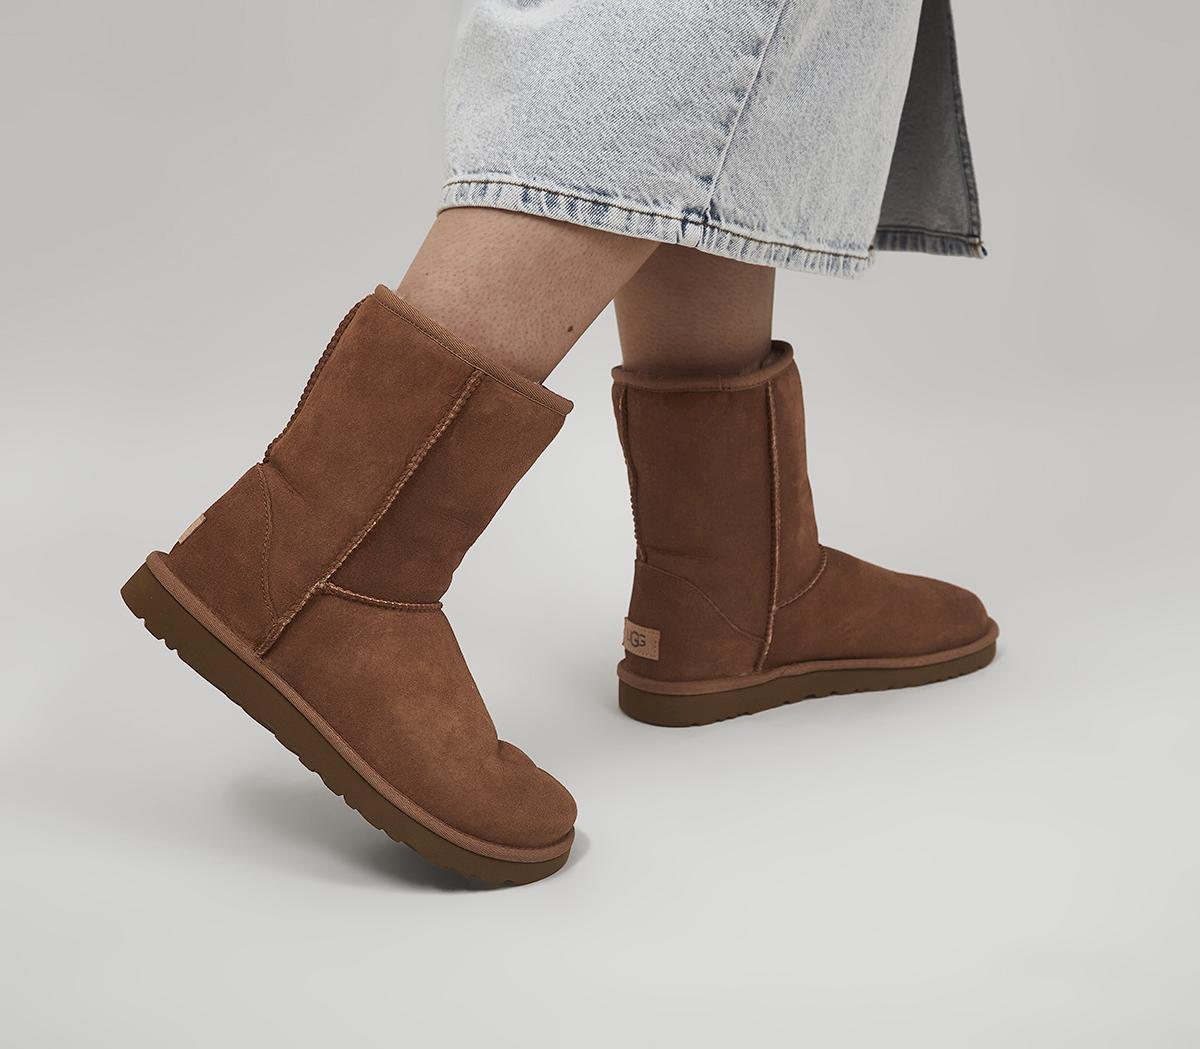 UGG Classic Short II Boots Chestnut Suede - Ankle Boots